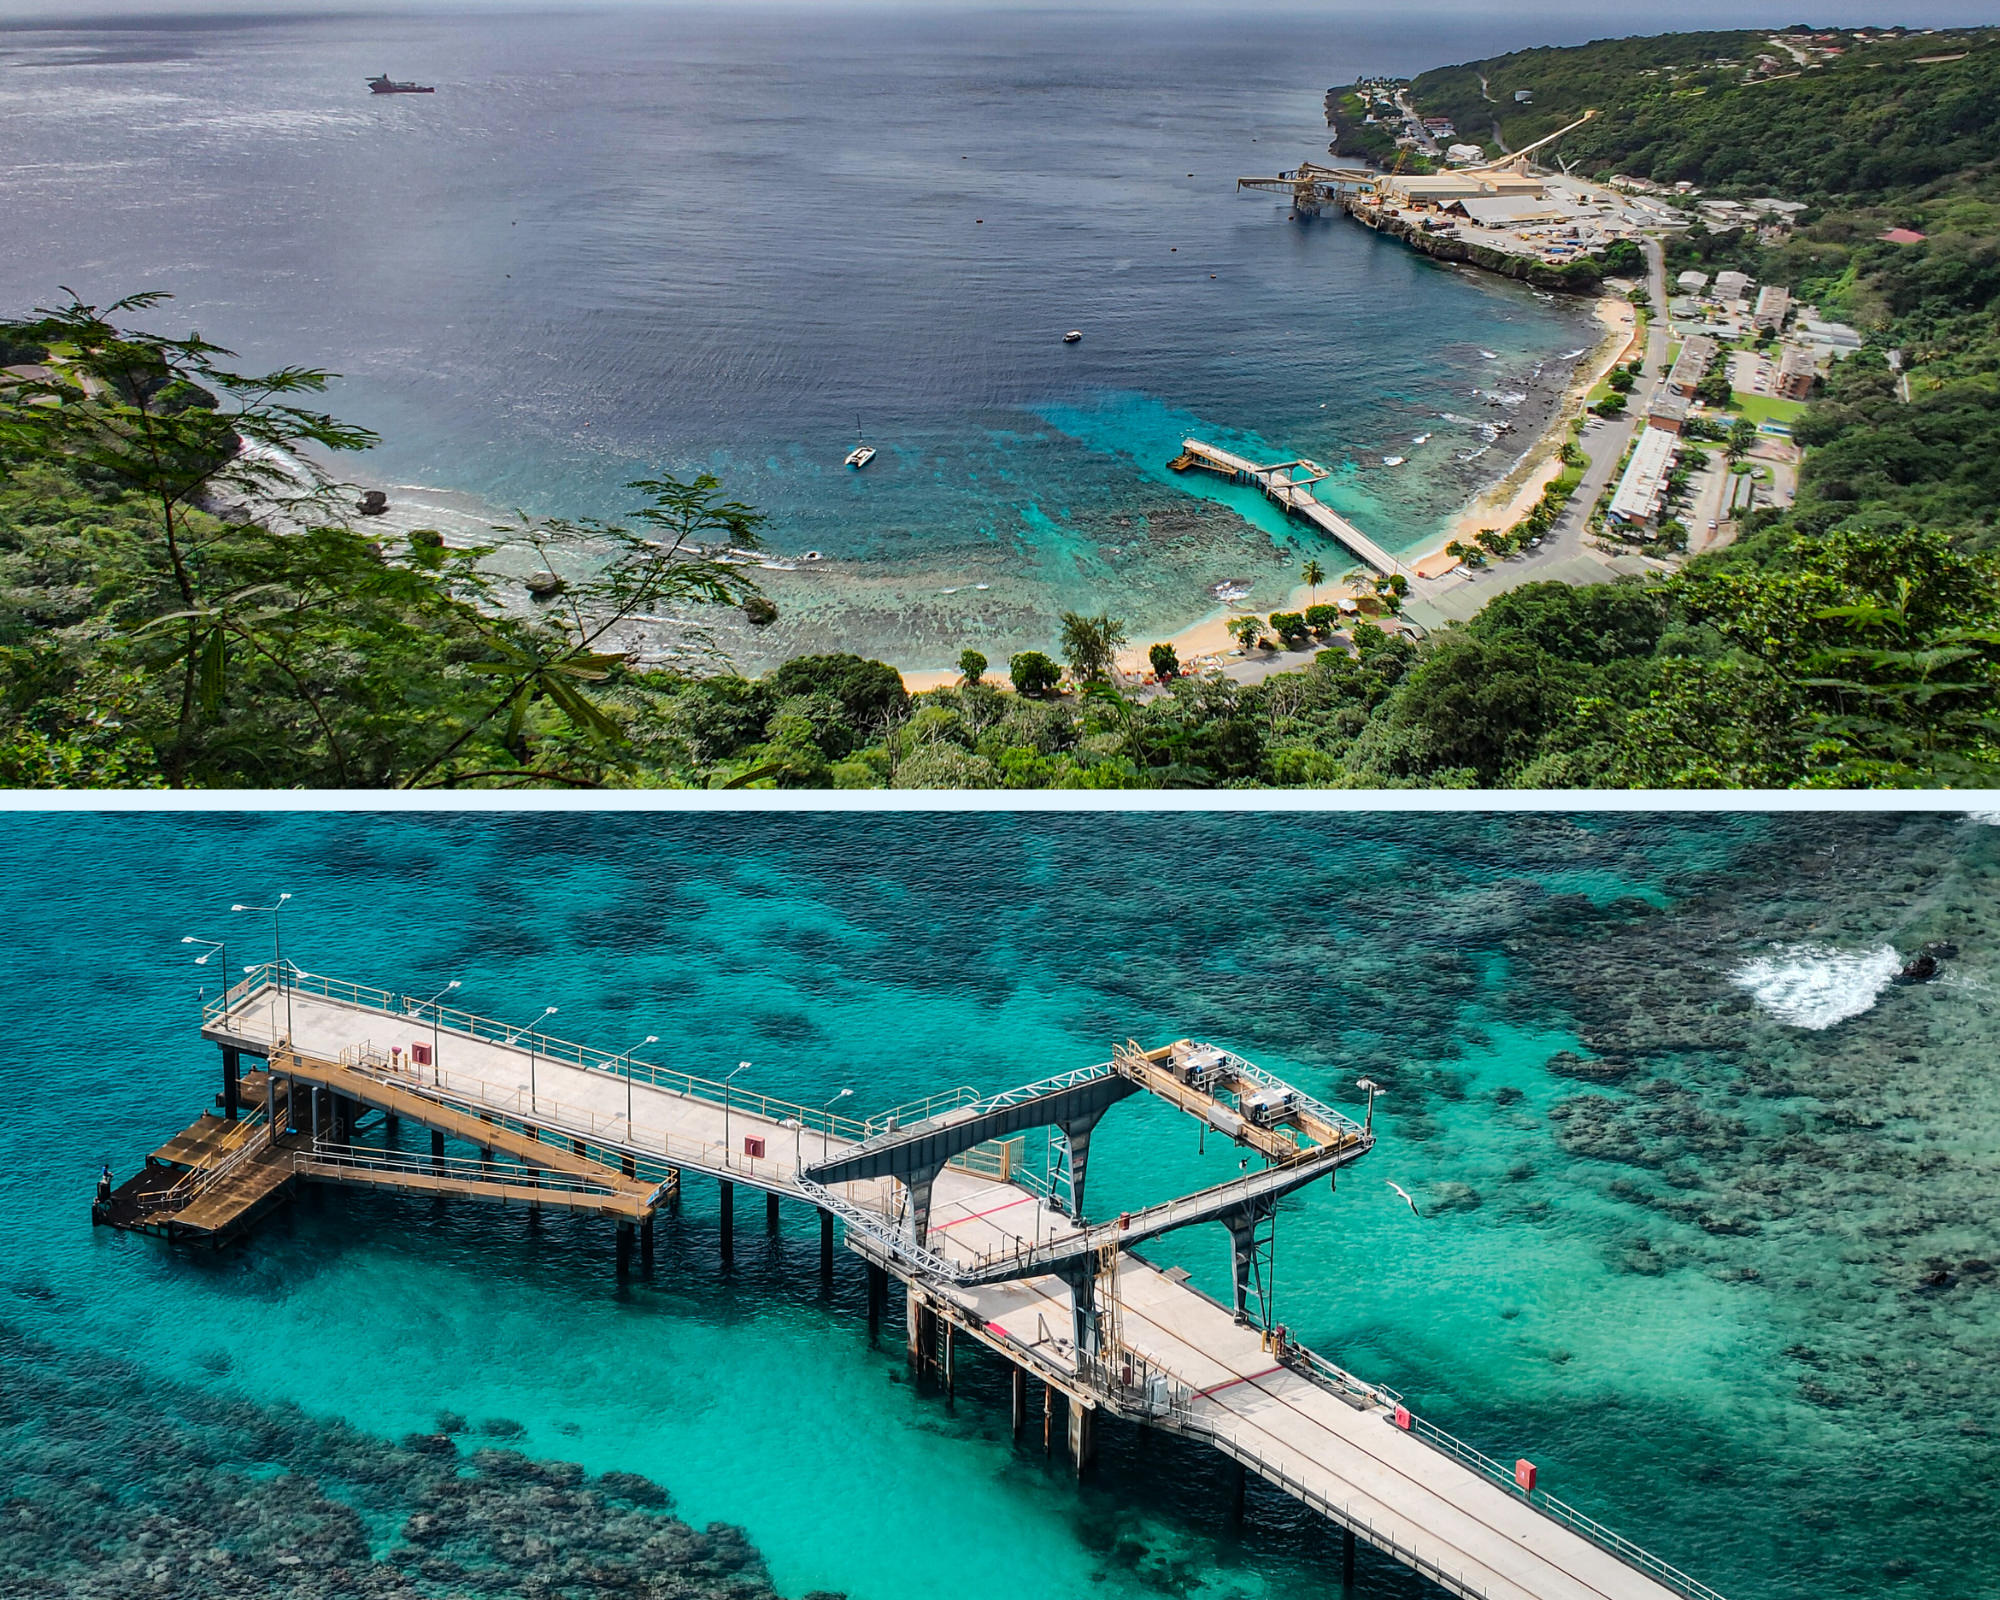 A photocollage showing Flying Fish Cove taken from the viewpoint at Territory Day Park and the commercial jetty in the Cove